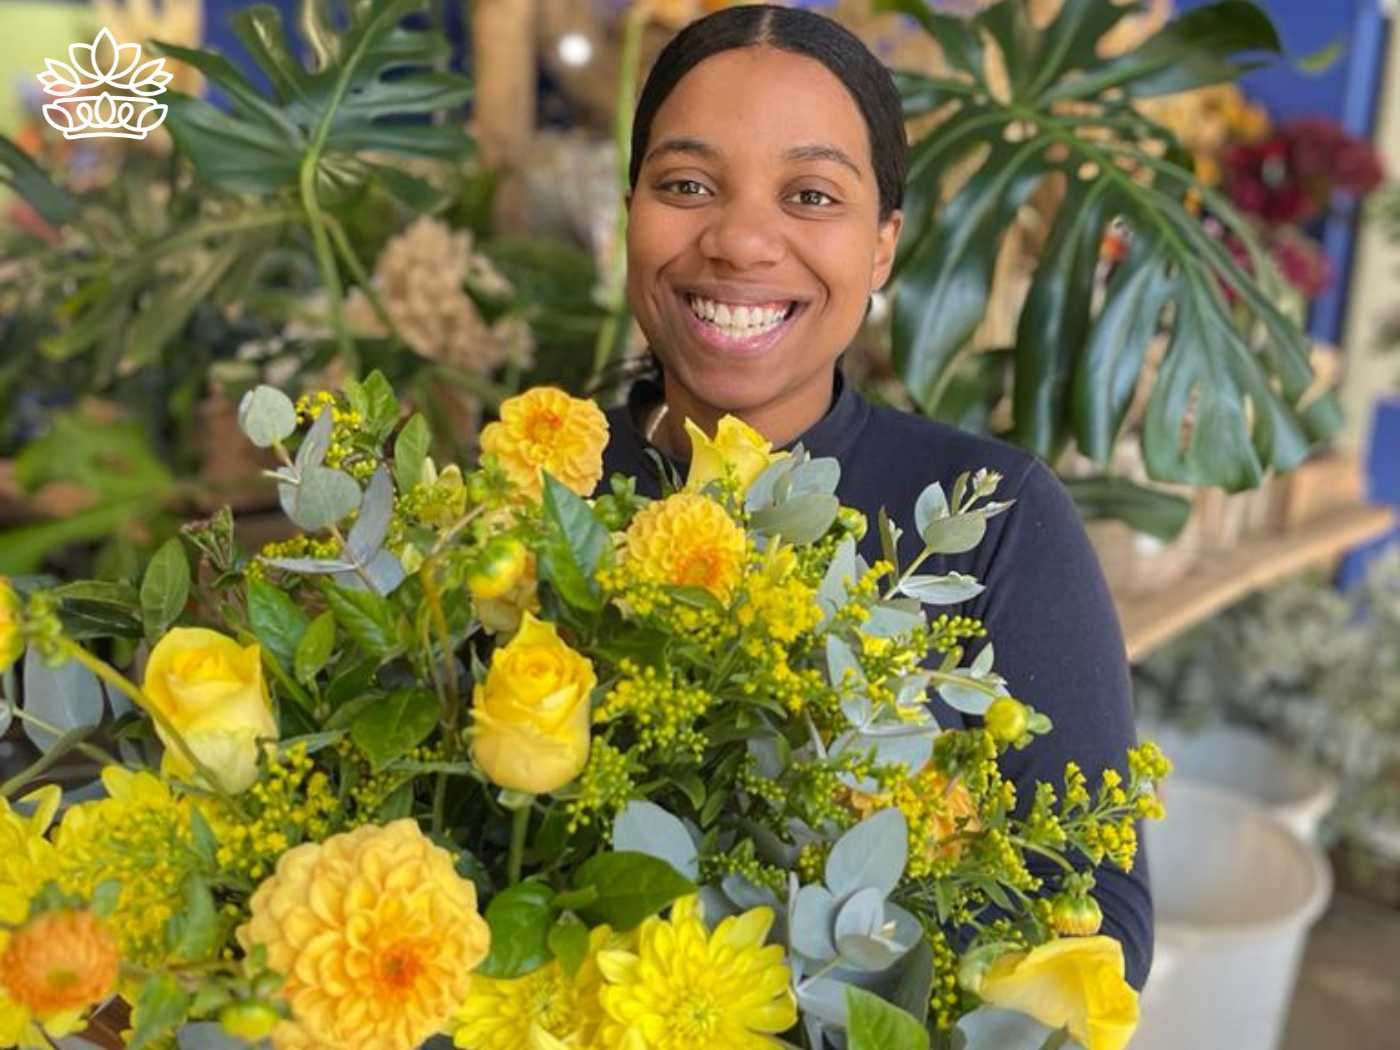 Smiling florist holding a vibrant yellow bouquet from the Flowers By Type Collection at Fabulous Flowers and Gifts. Similar cut flowers are grown and produced with care for the perfect floral arrangement.